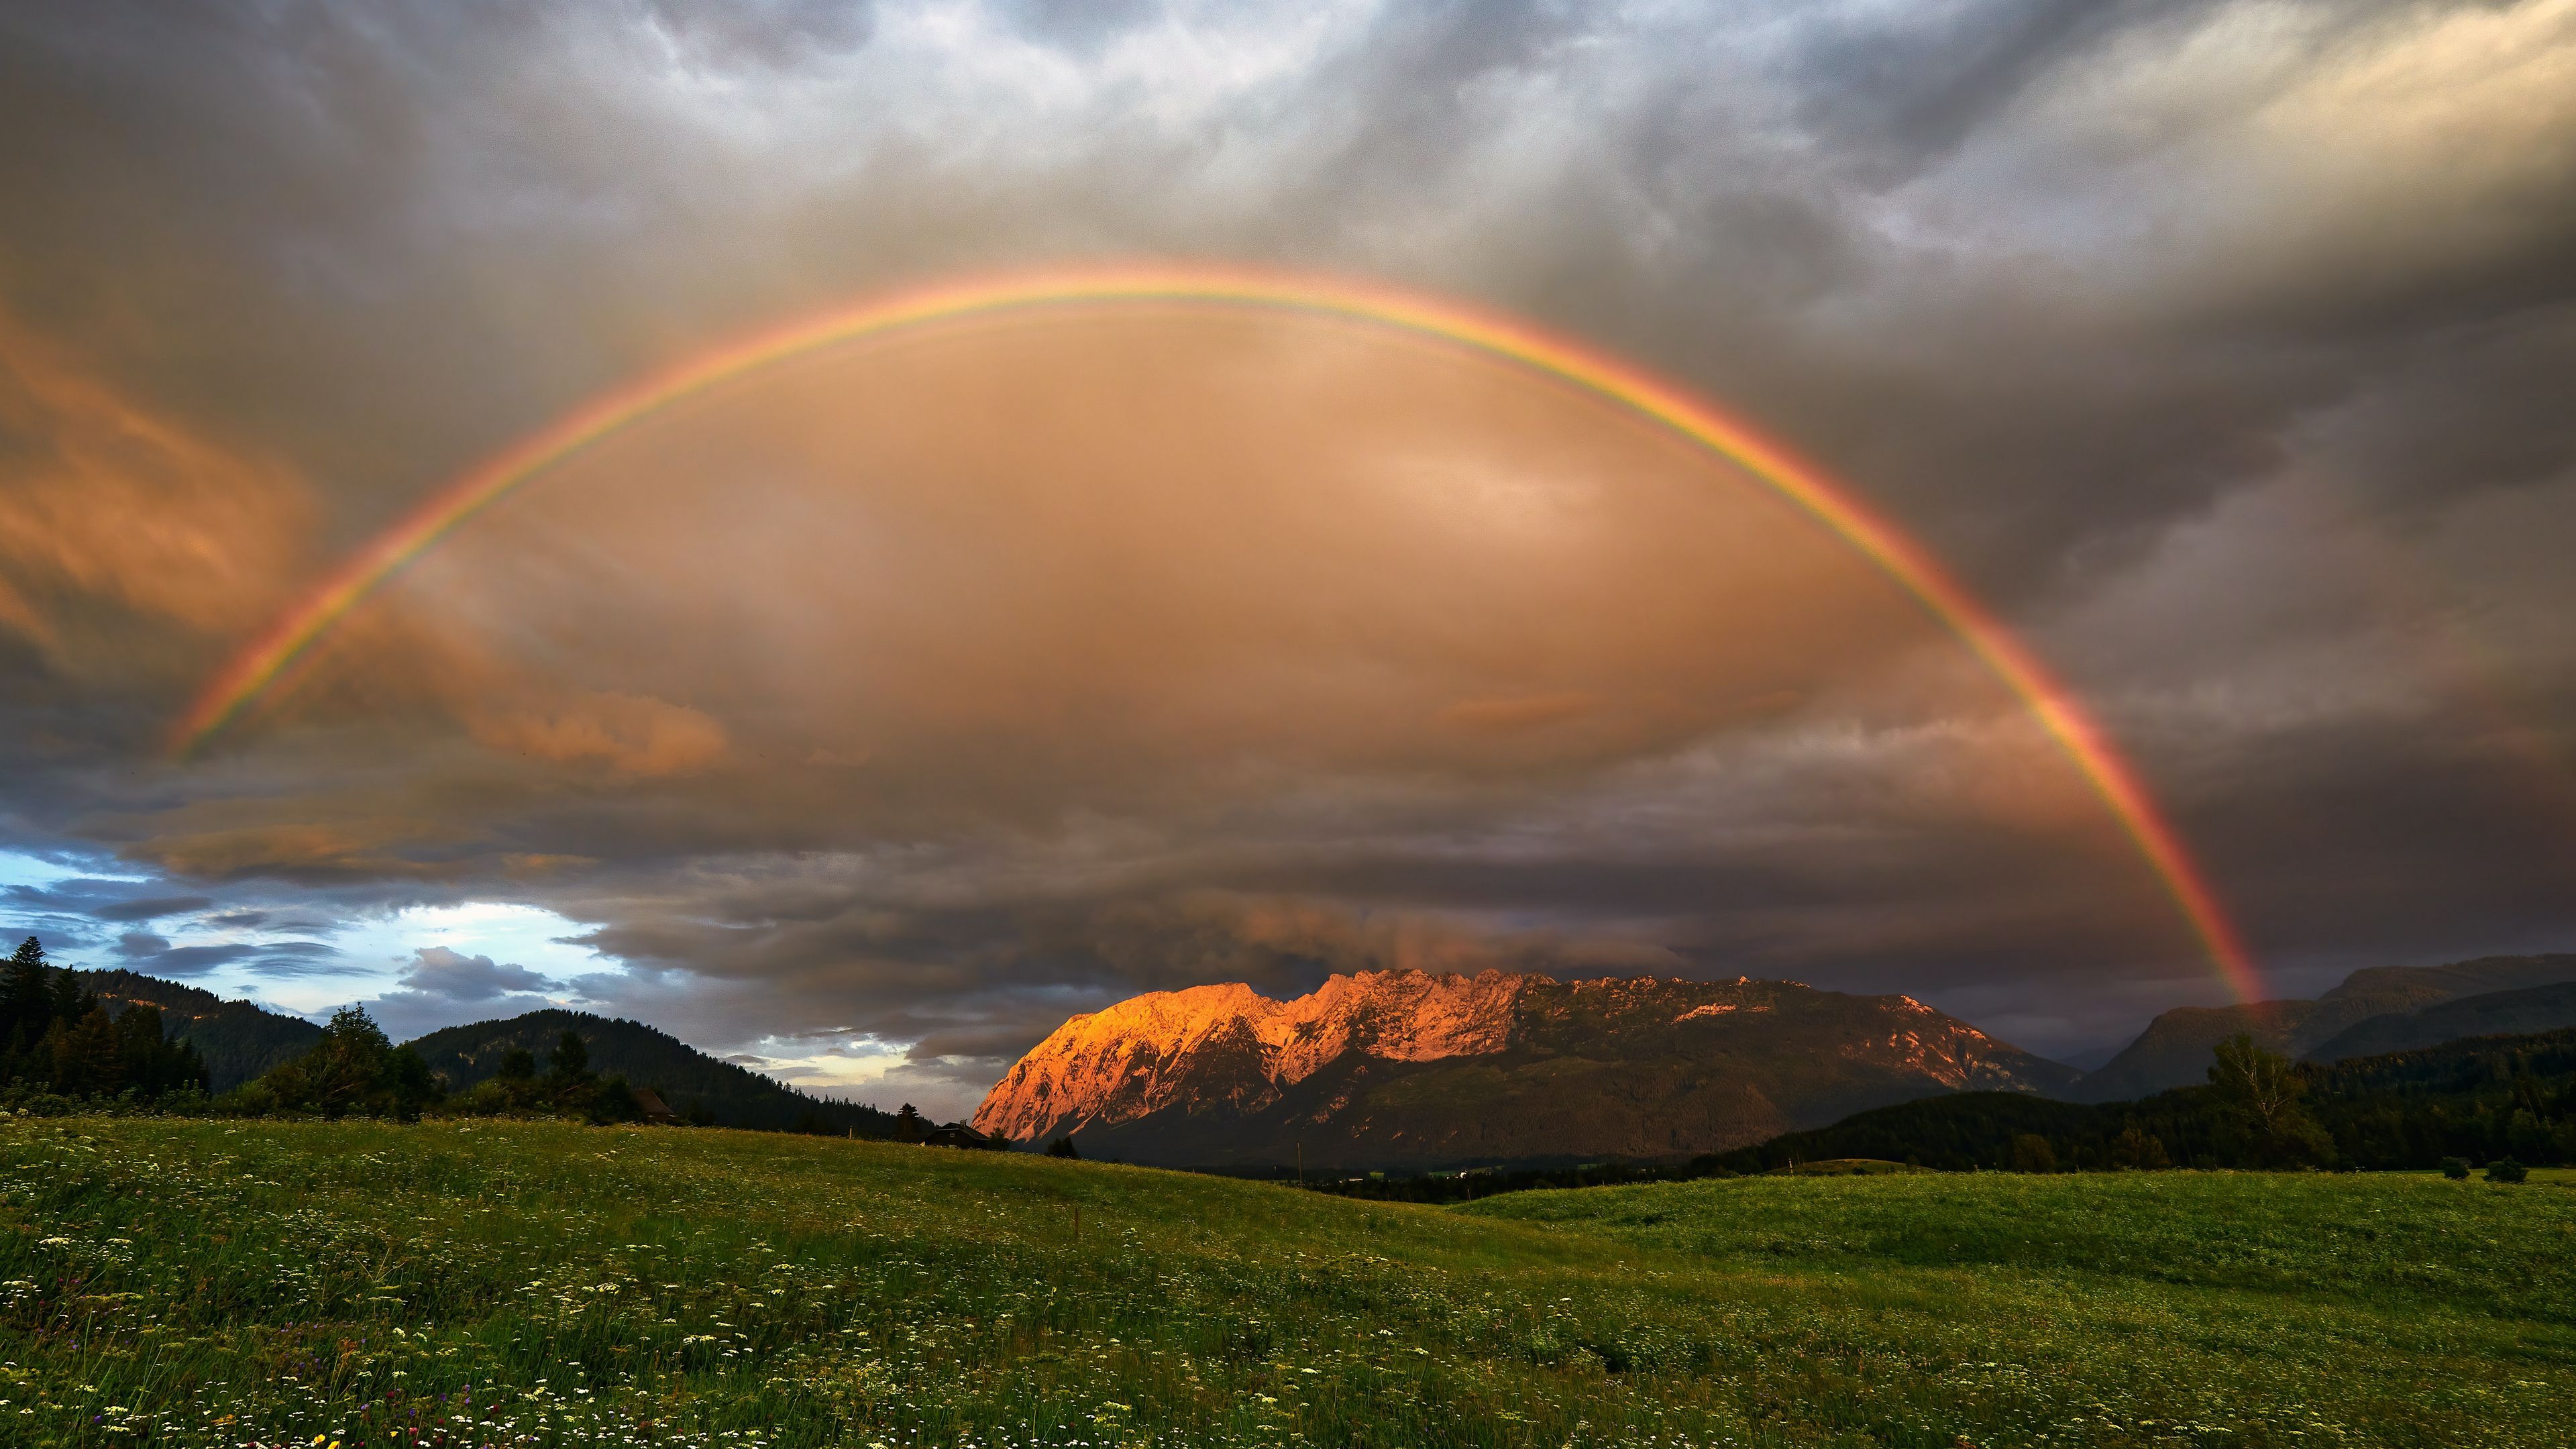 Download wallpaper 3840x2160 rainbow, meadow, mountains, nature, landscape 4k uhd 16:9 HD background